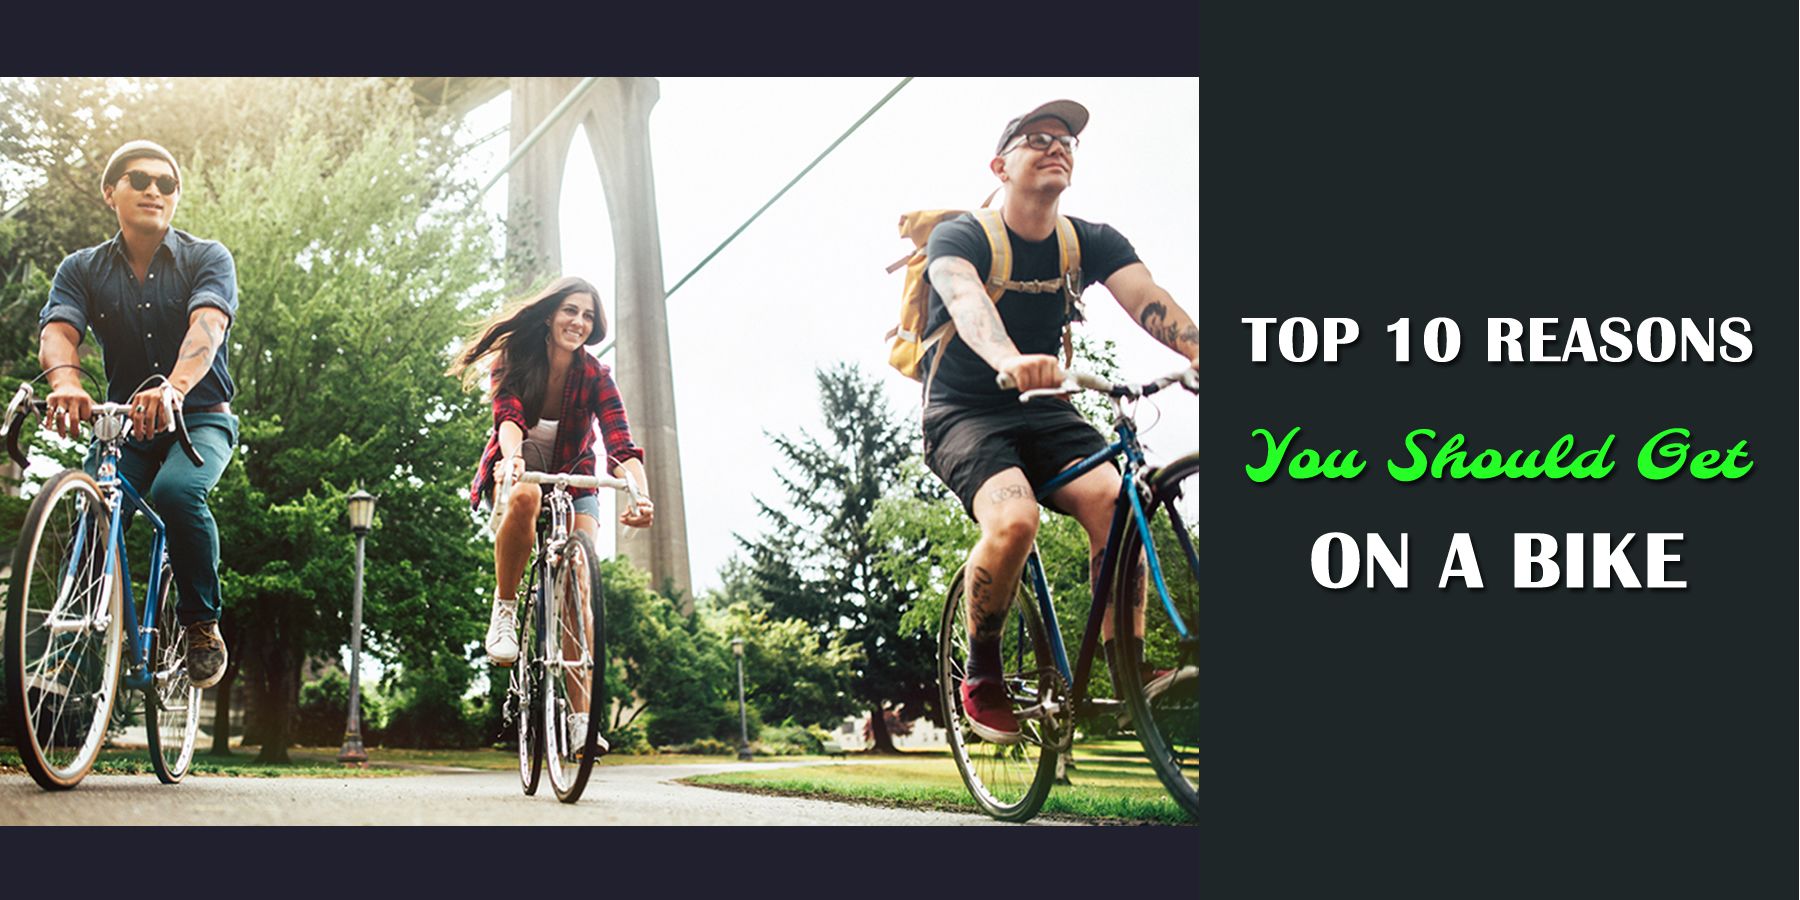 10 Reasons You Should Get on a Bike